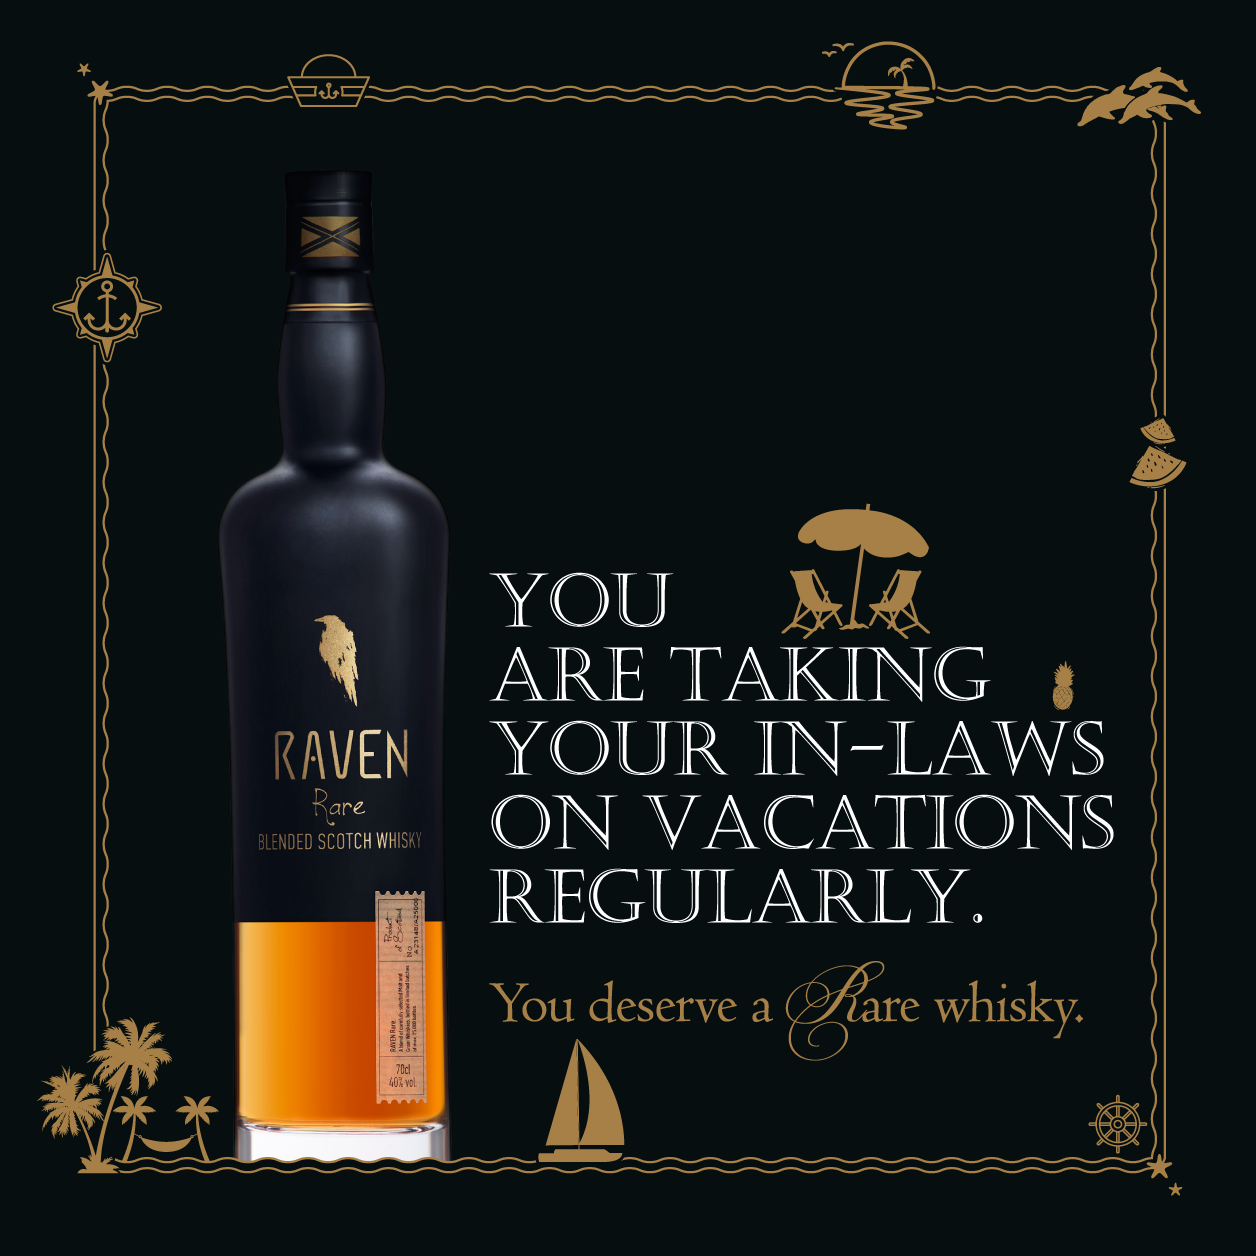 A3 THE SITE | RAVEN RARE WHISKY